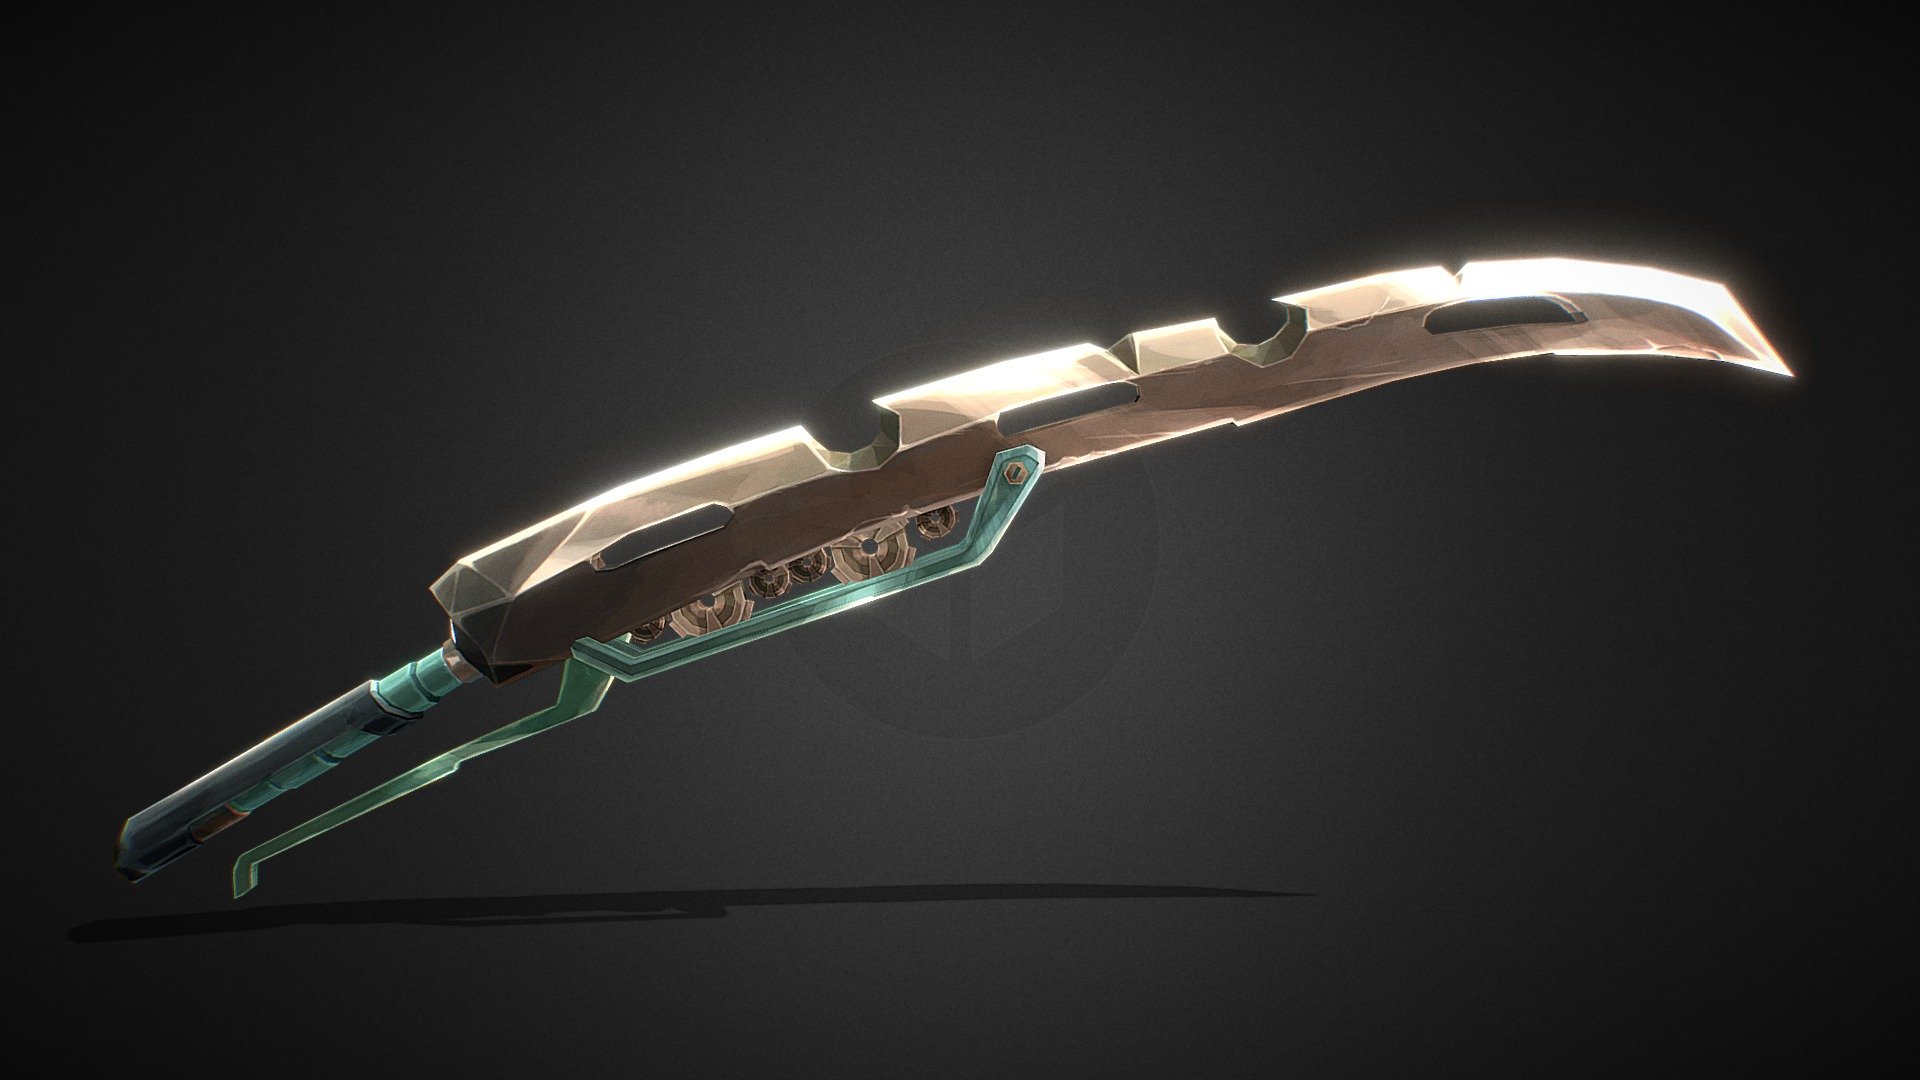 First ever stylized 3D model I made, inspired by the Netflix series Arcane. It was a class project, so if you're interested, please also check out my classmates' works via the tag #bib3d2023! - Arcane Style Sword - Download Free 3D model by Comika Draws (@Comika_Draws) 3d model